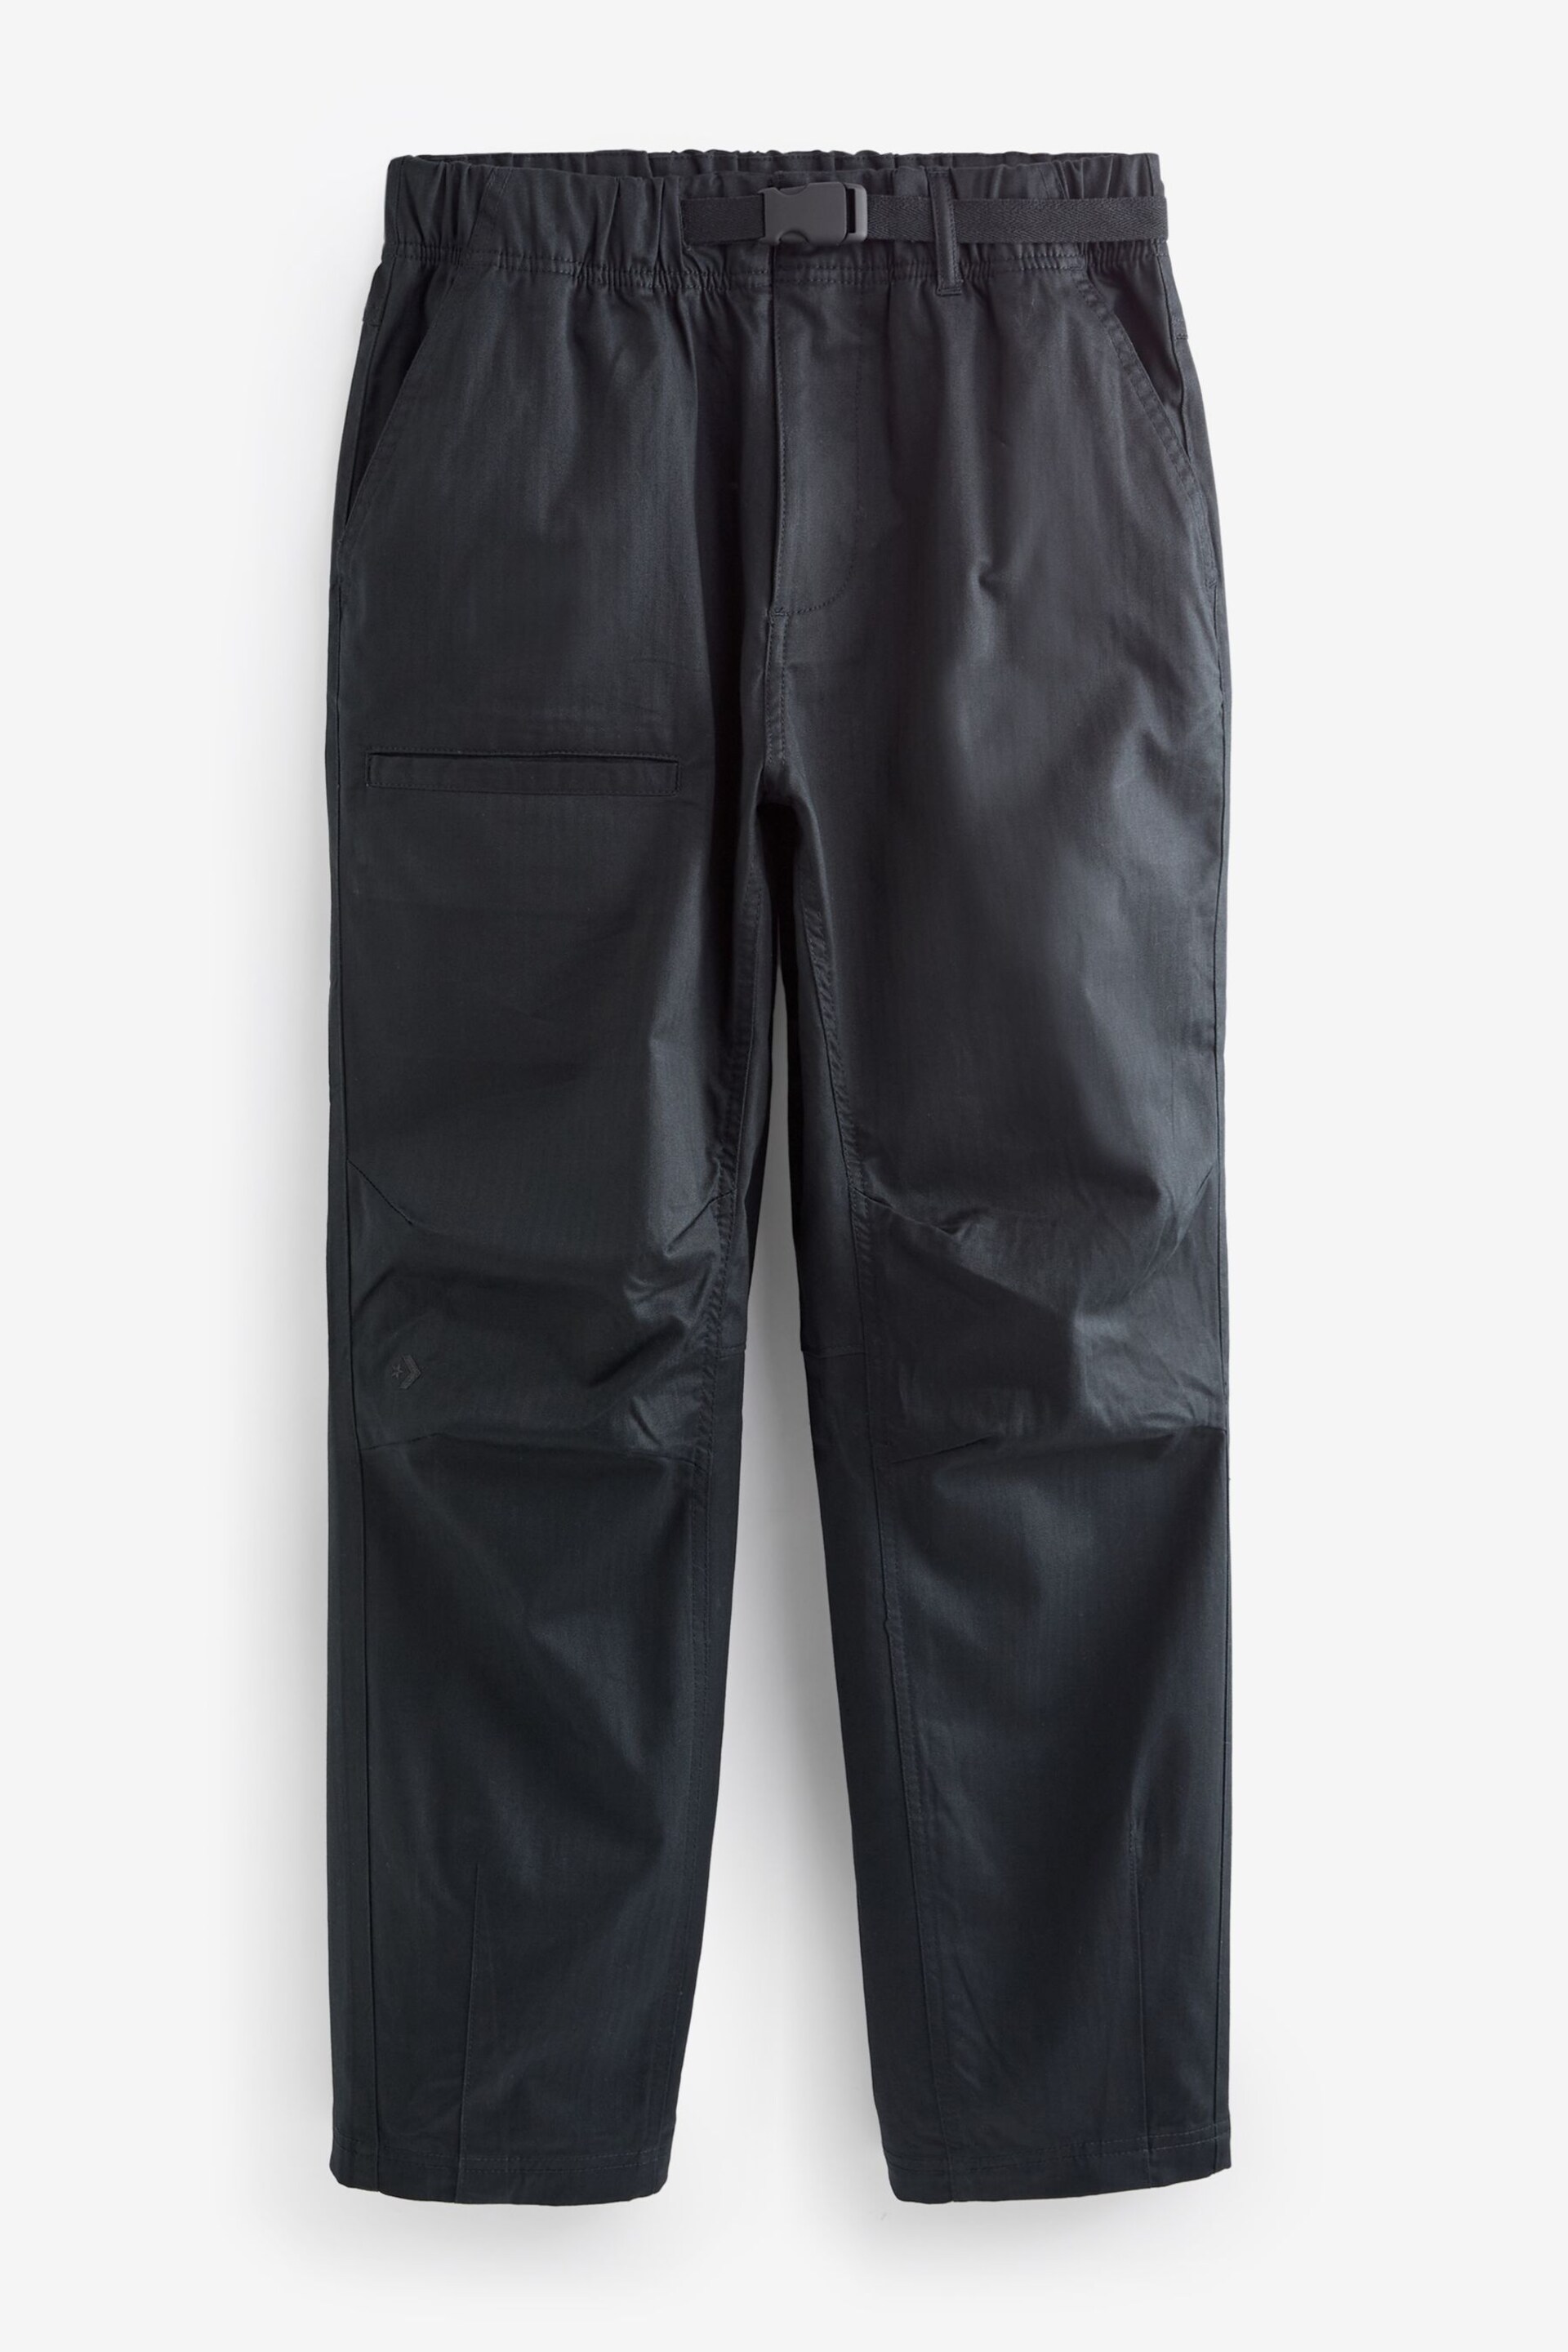 Converse Black Elevated Woven Adjustable Trousers - Image 5 of 5